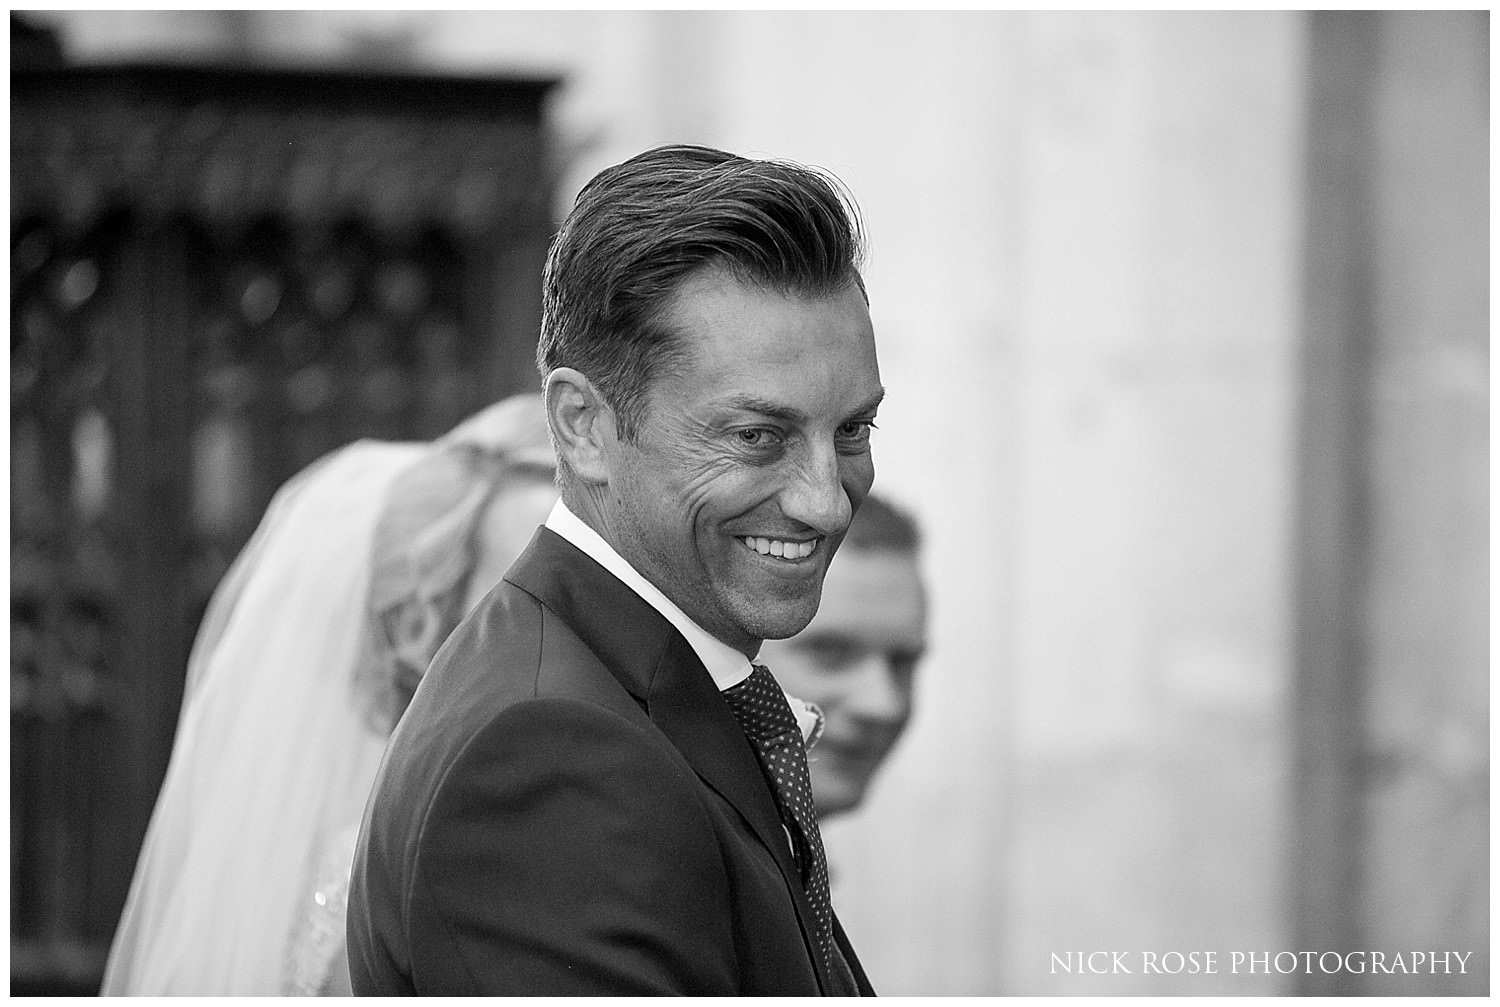  Groom smiling during the wedding ceremony in St Mary's church in Tickhill 